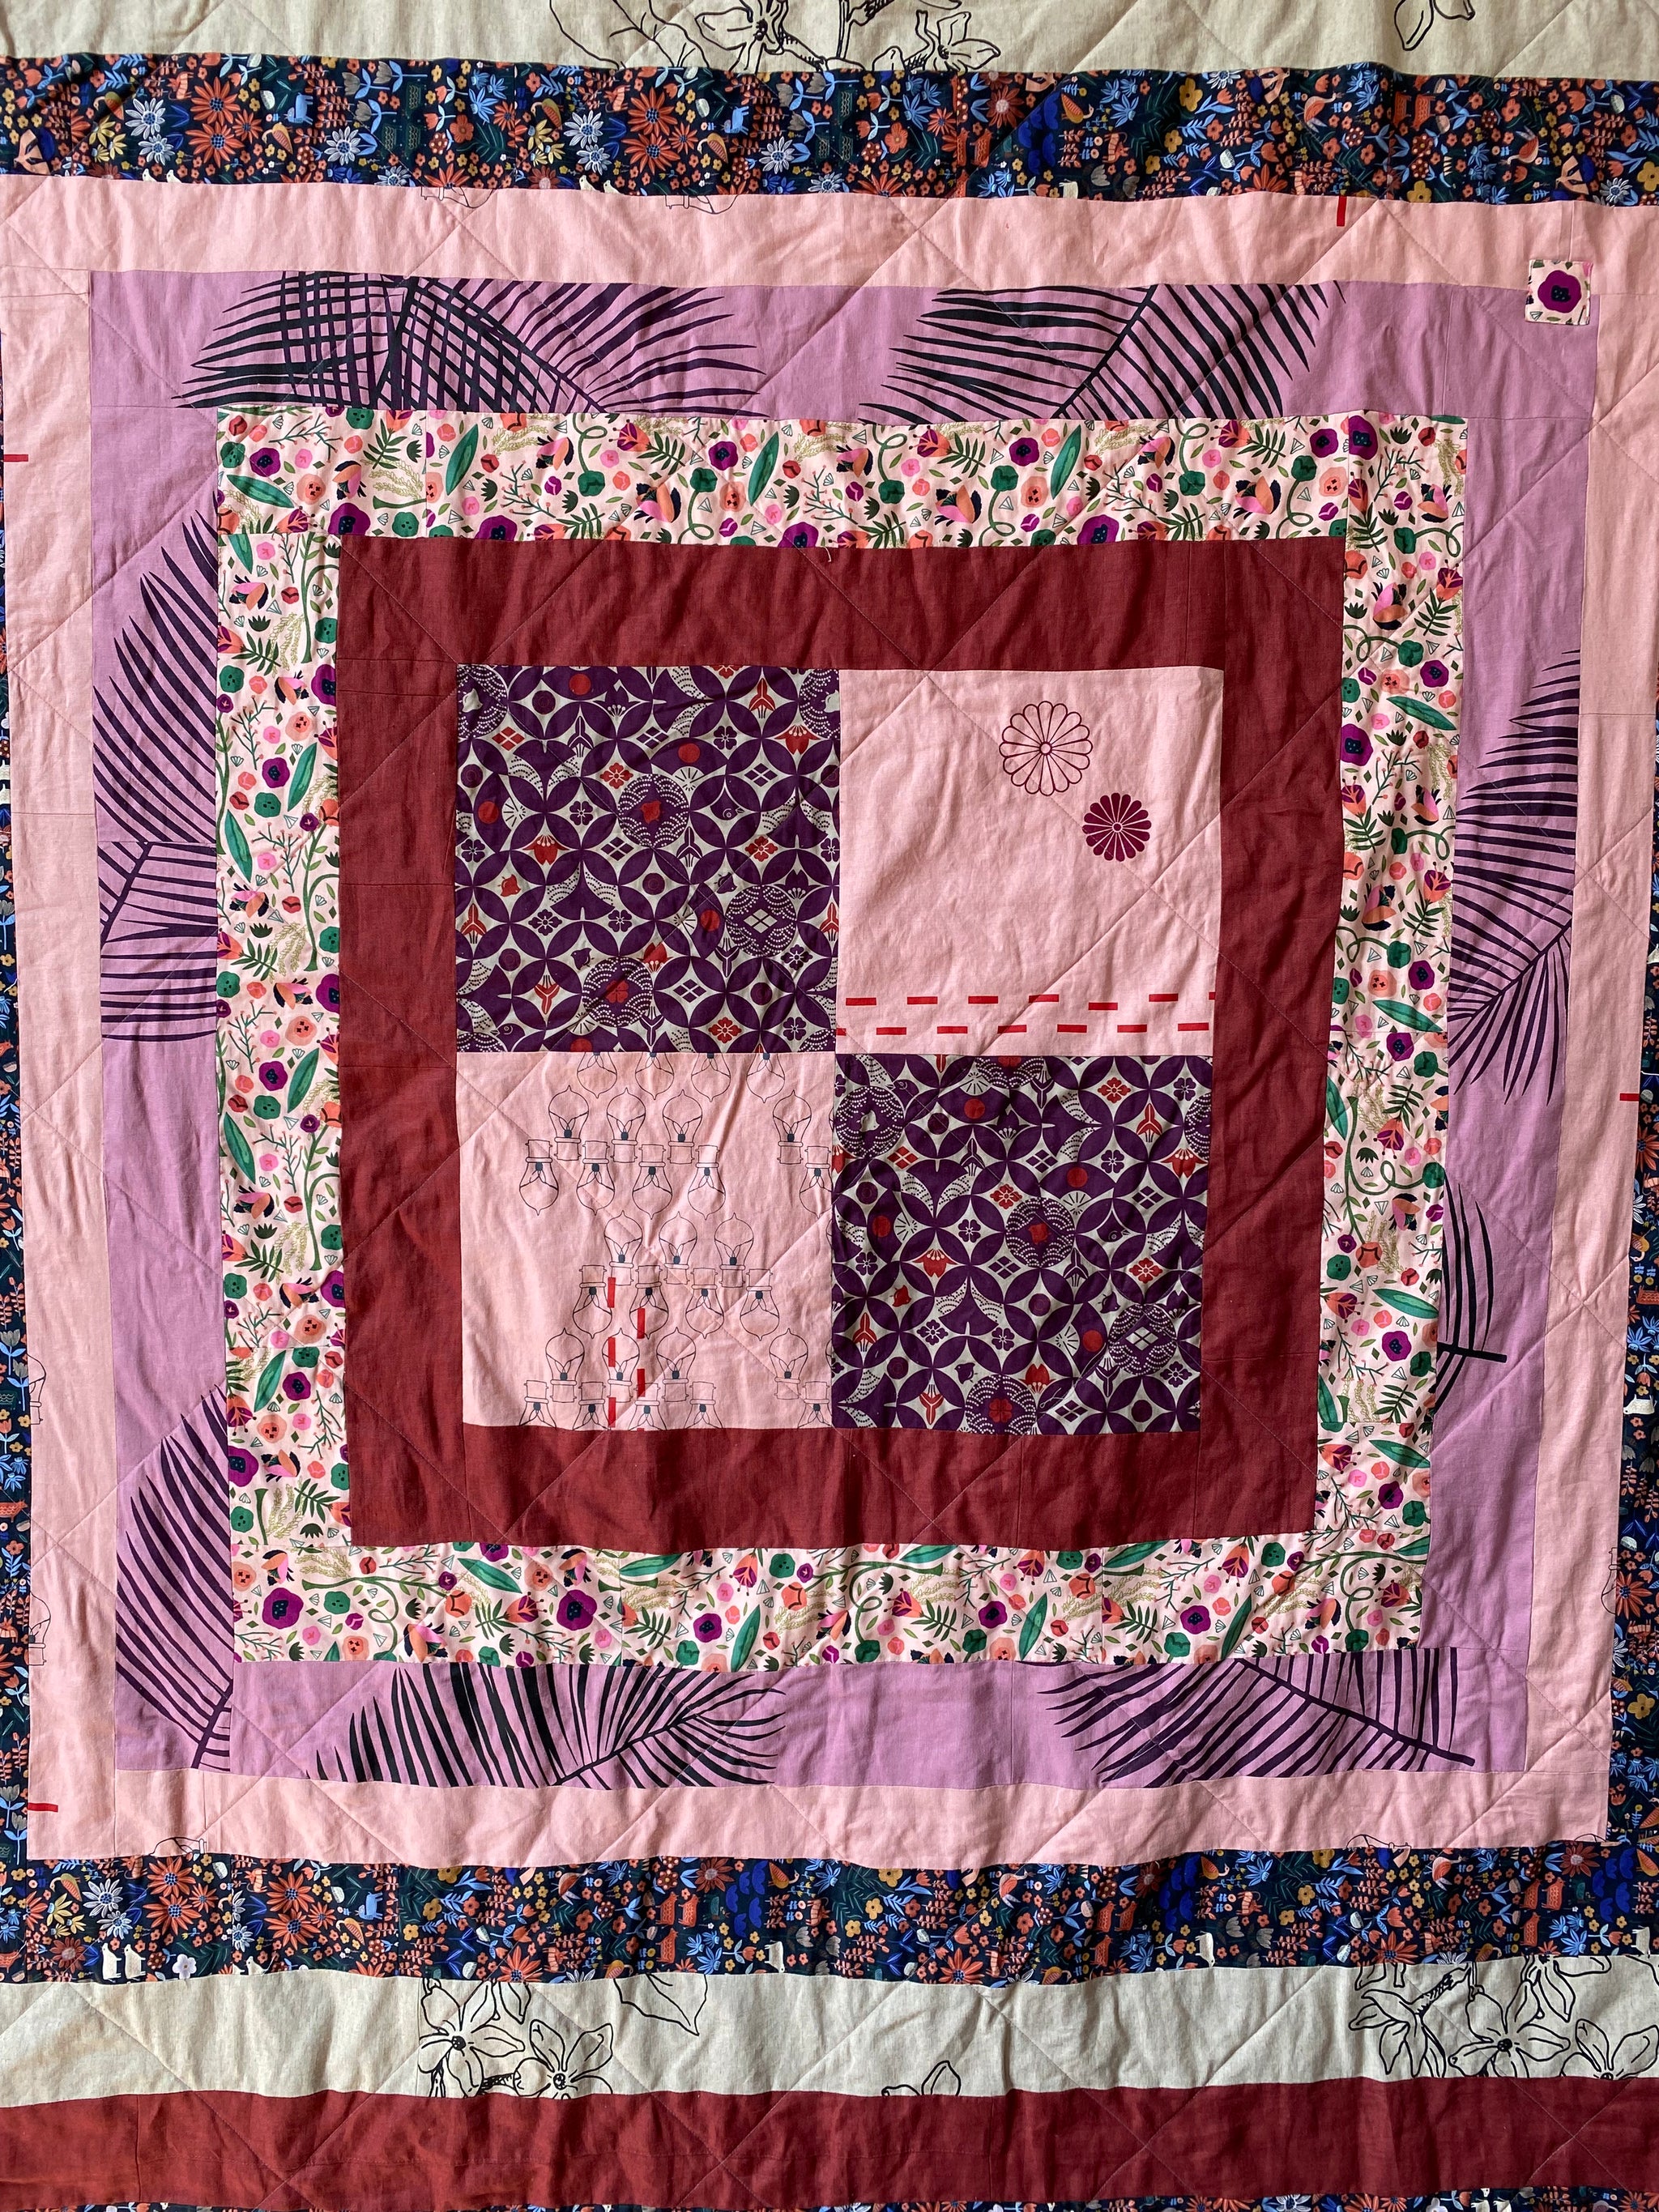 OOAK Quilt - When the Dog Barks